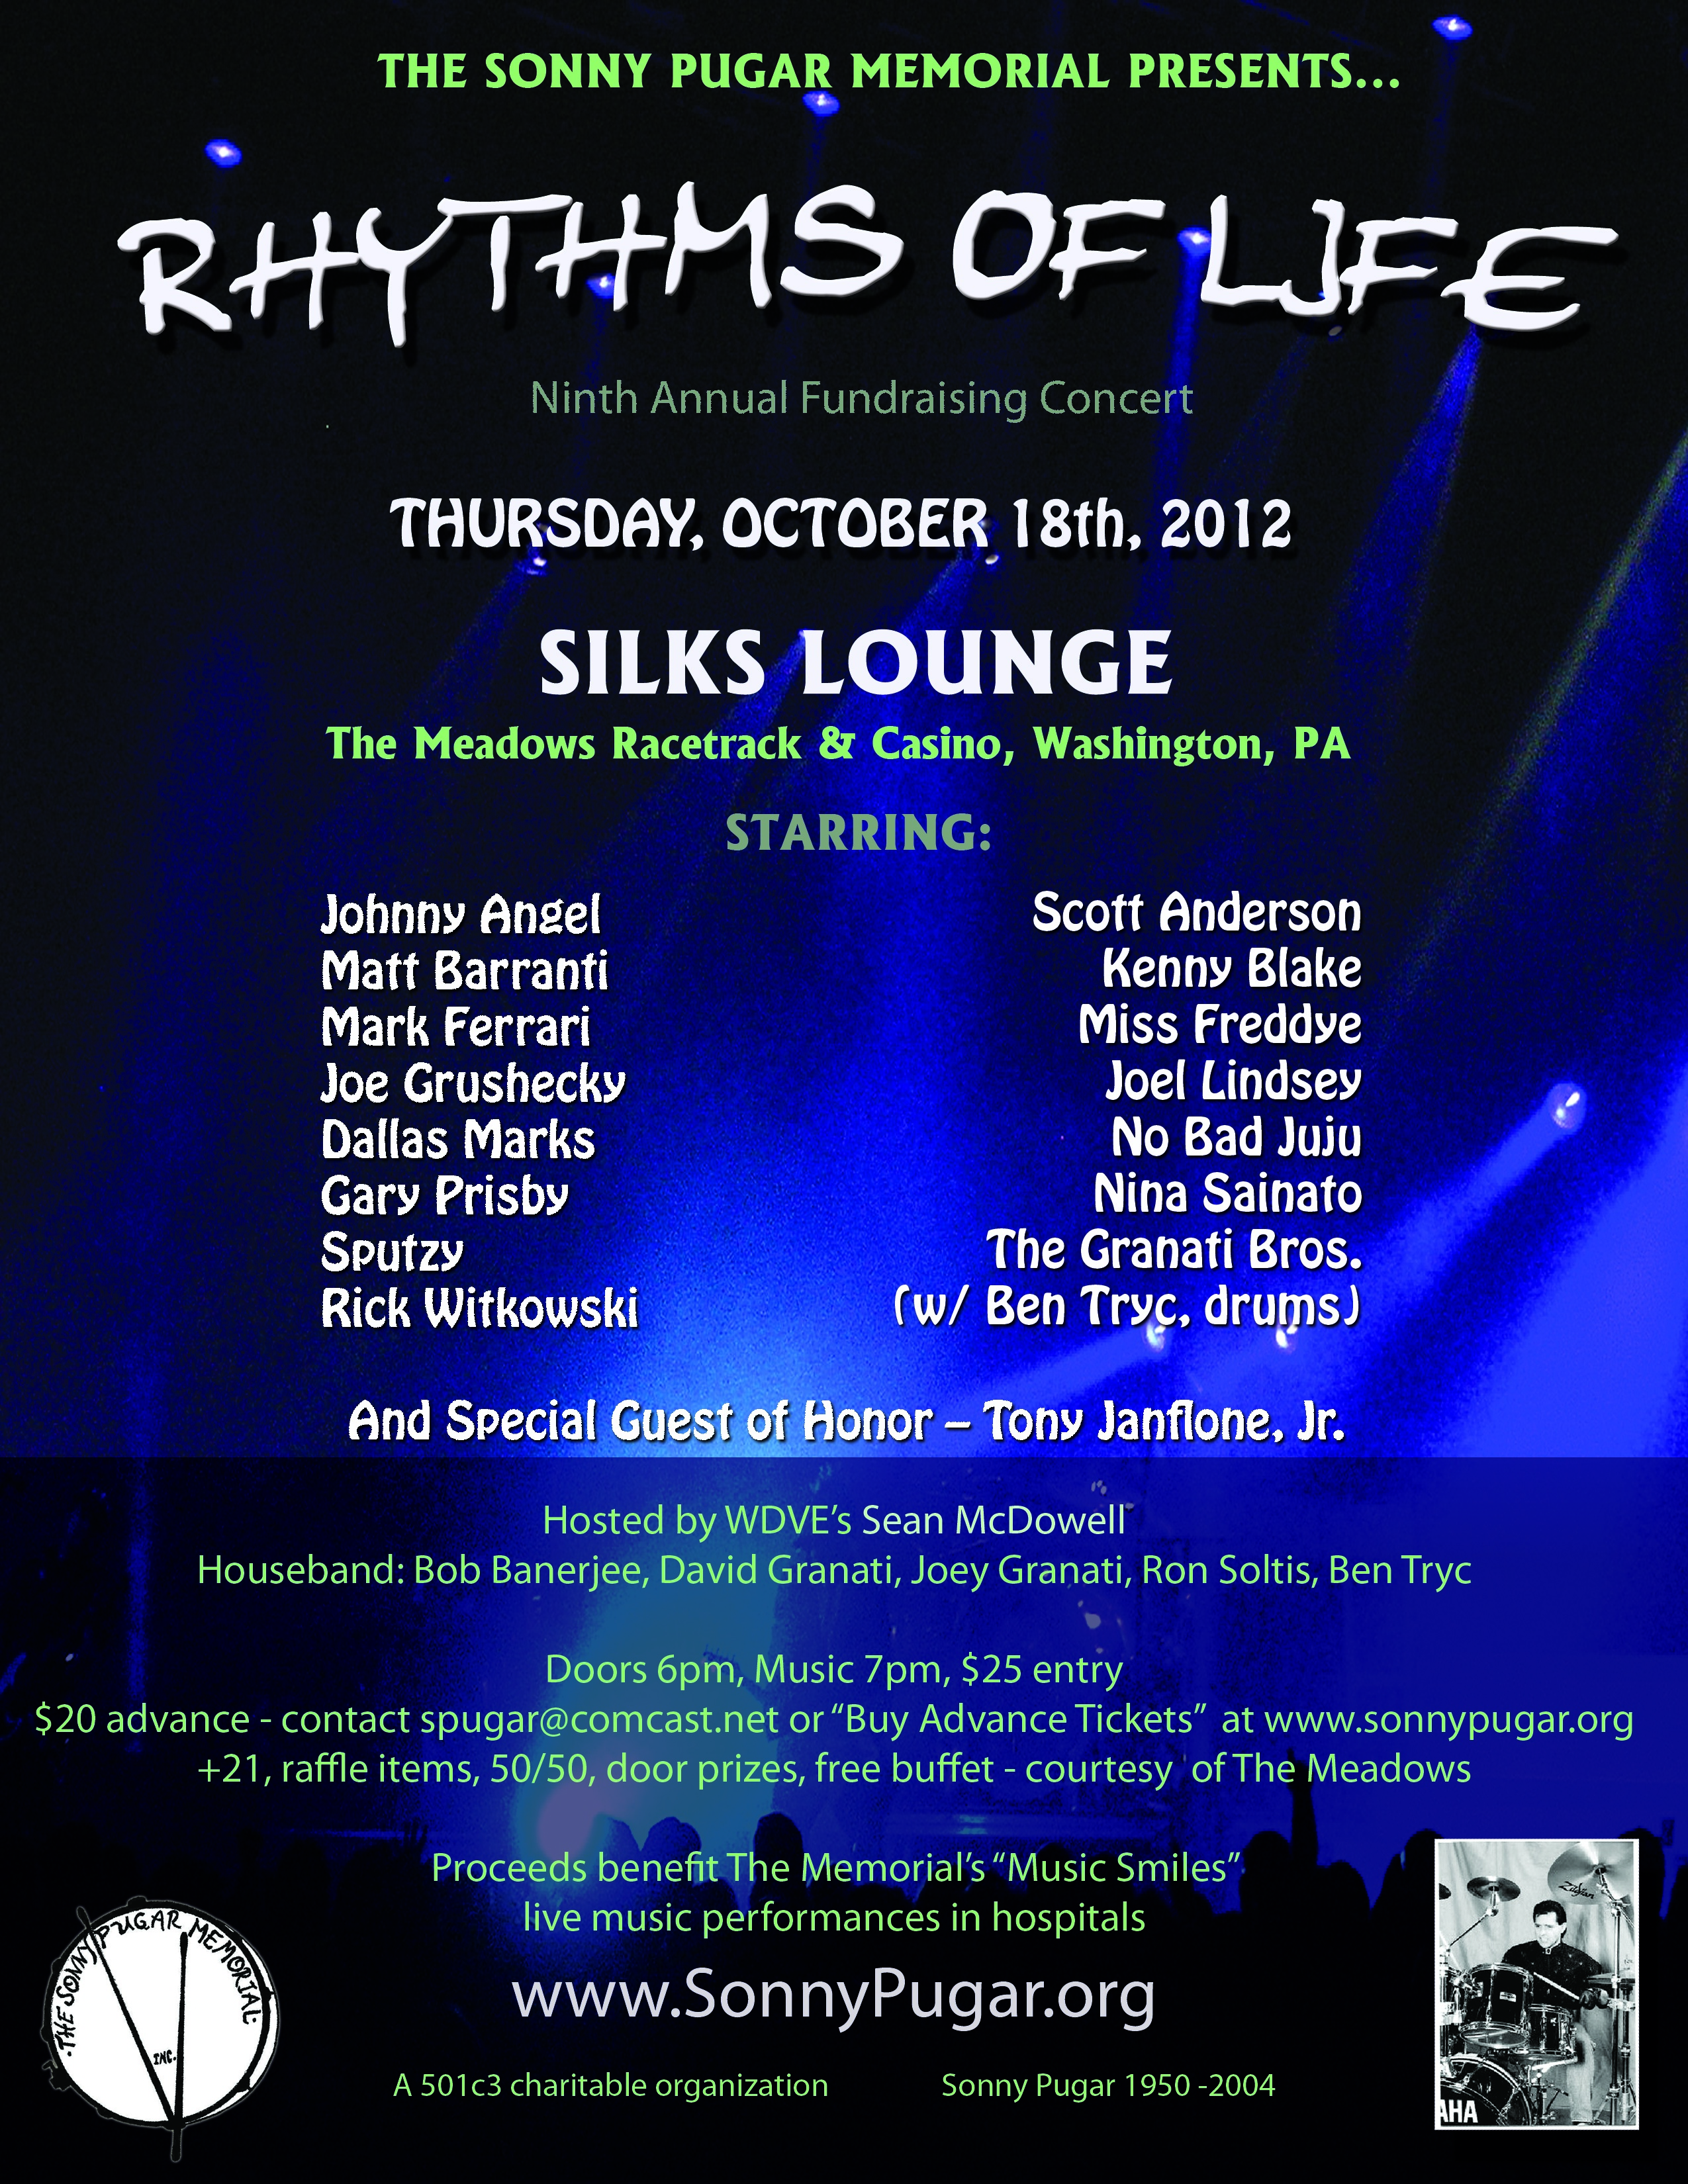 Mark to perform @ “Rhythms of Life” Fundraising Concert to benefit “Music Smiles”